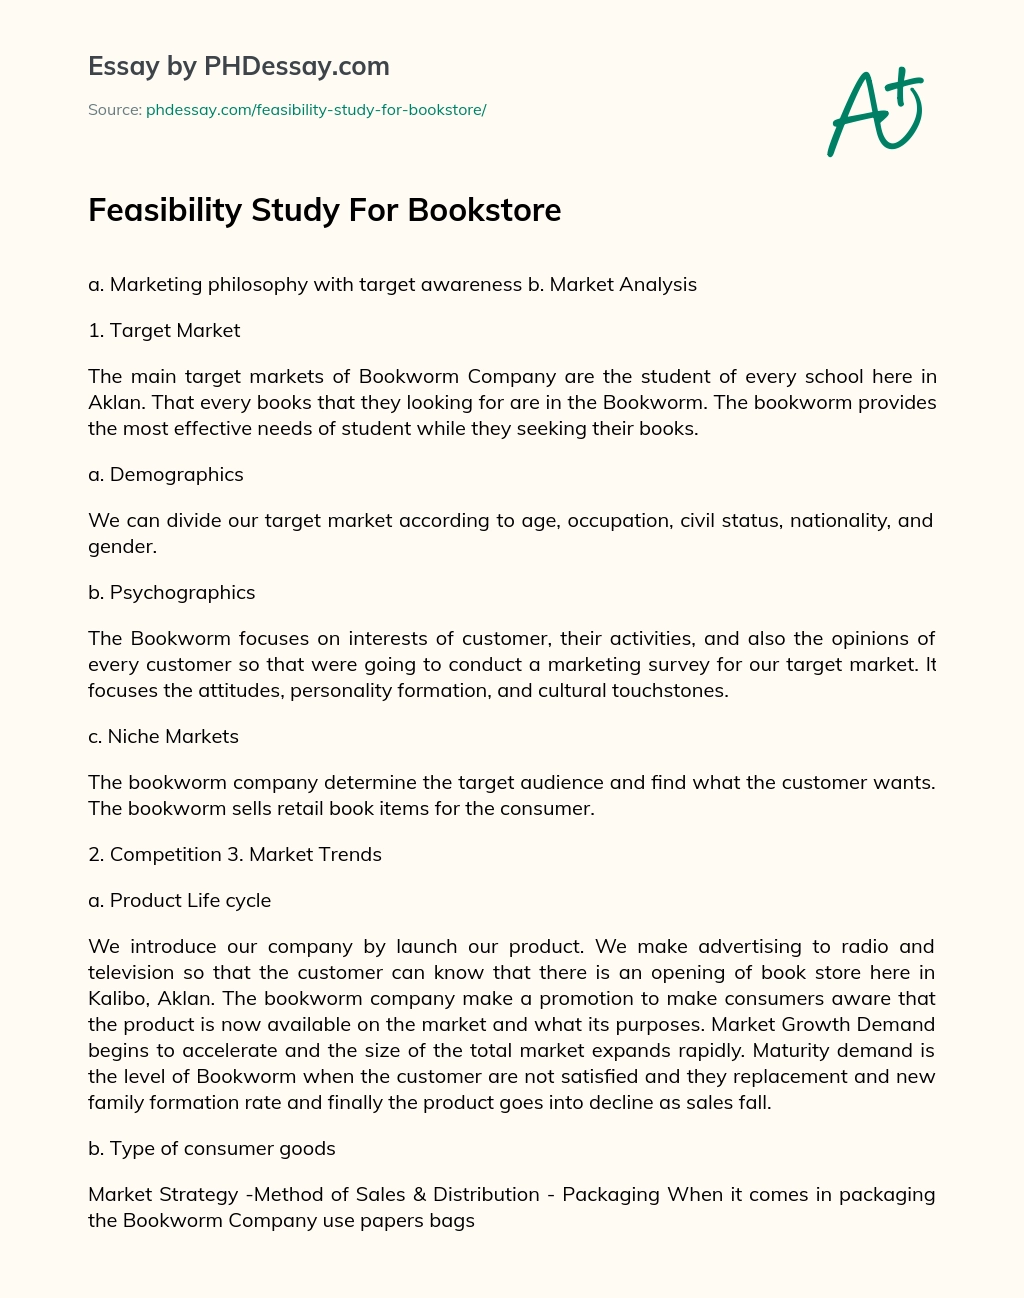 Feasibility Study For Bookstore essay